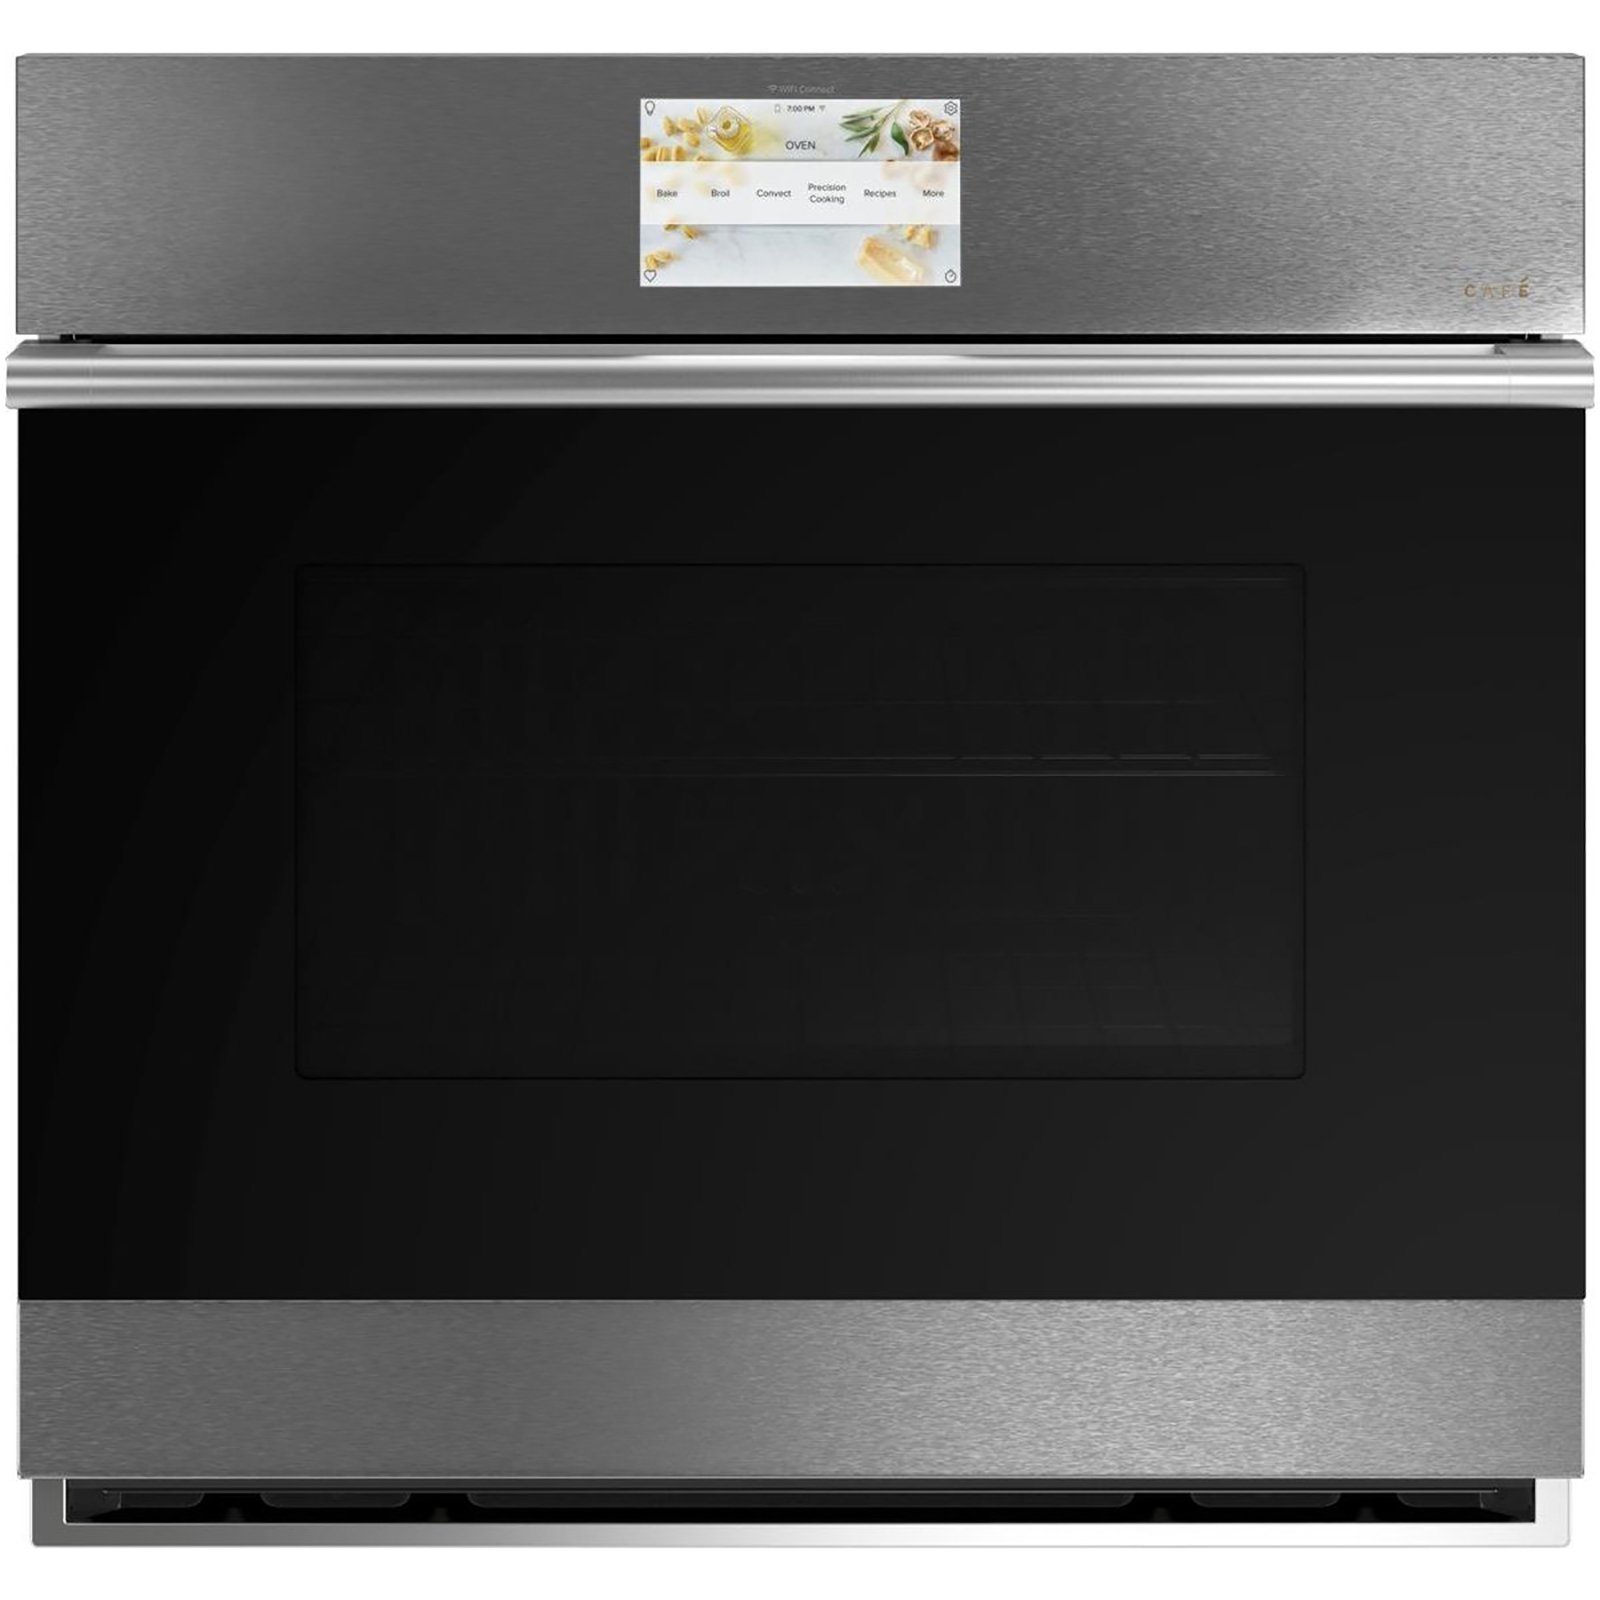 CAFE CTS70DM2NS5 30" Smart Single Wall Oven with Convection - Platinum Glass